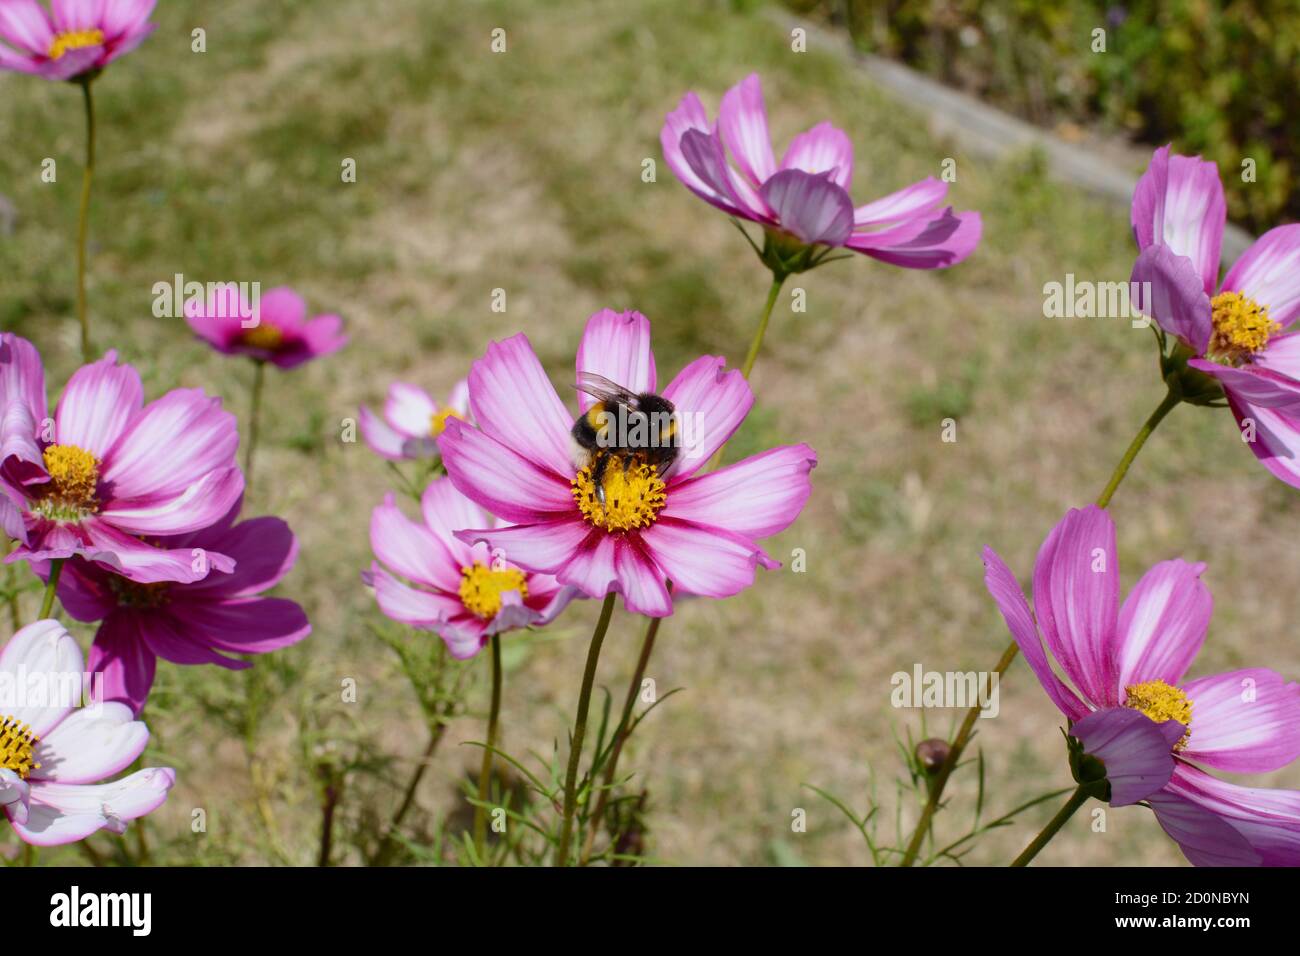 Bumblebee pollinating pink and white Cosmos Peppermint Rock flowers in a rural allotment garden Stock Photo